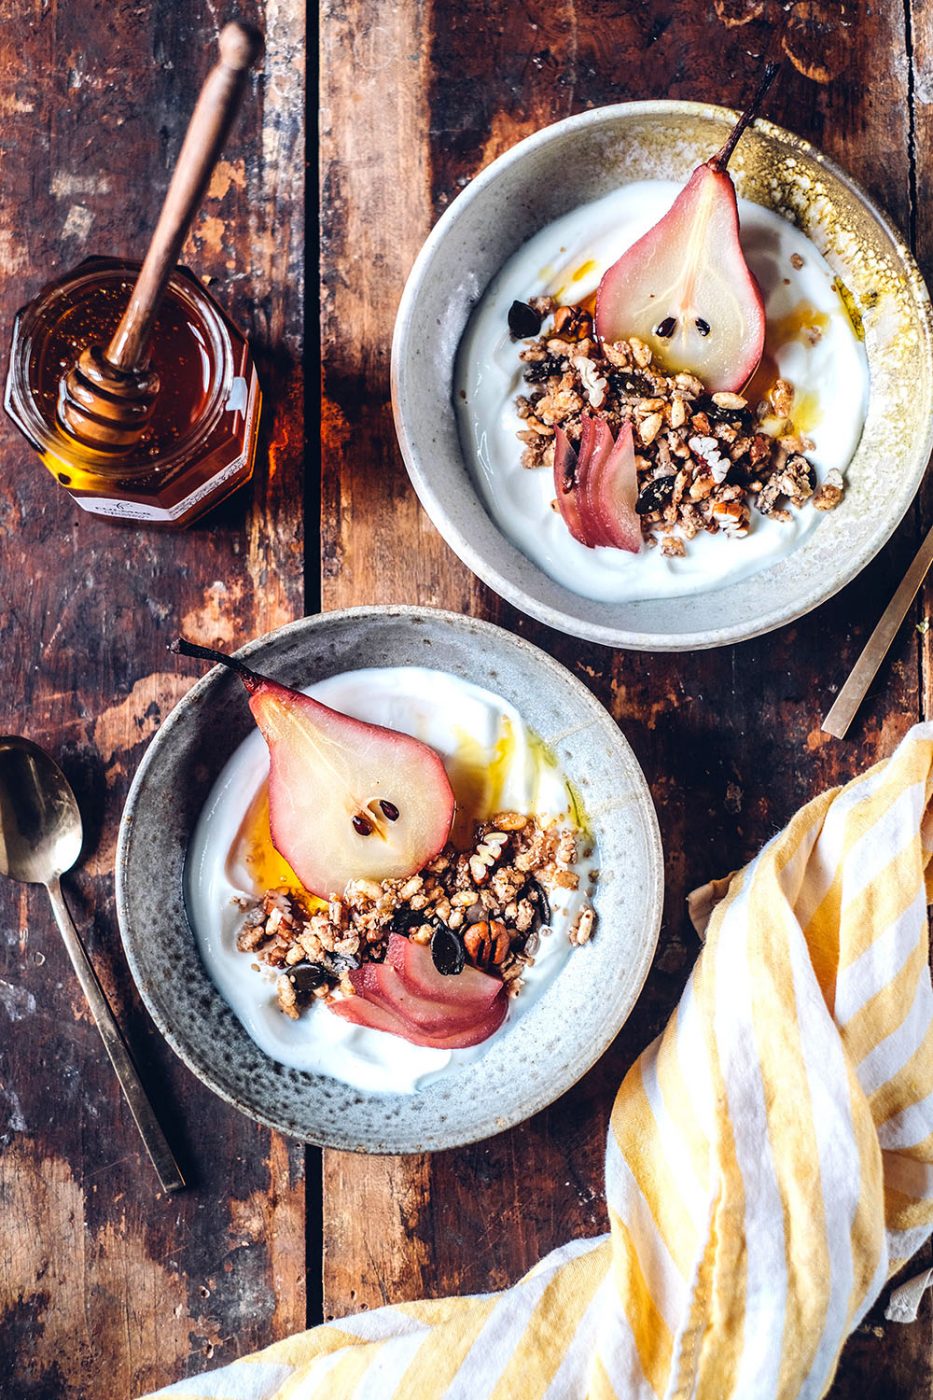 Image for Gluten-free Honey Granola with Poached Pears – Our Favorite Autumn Breakfast